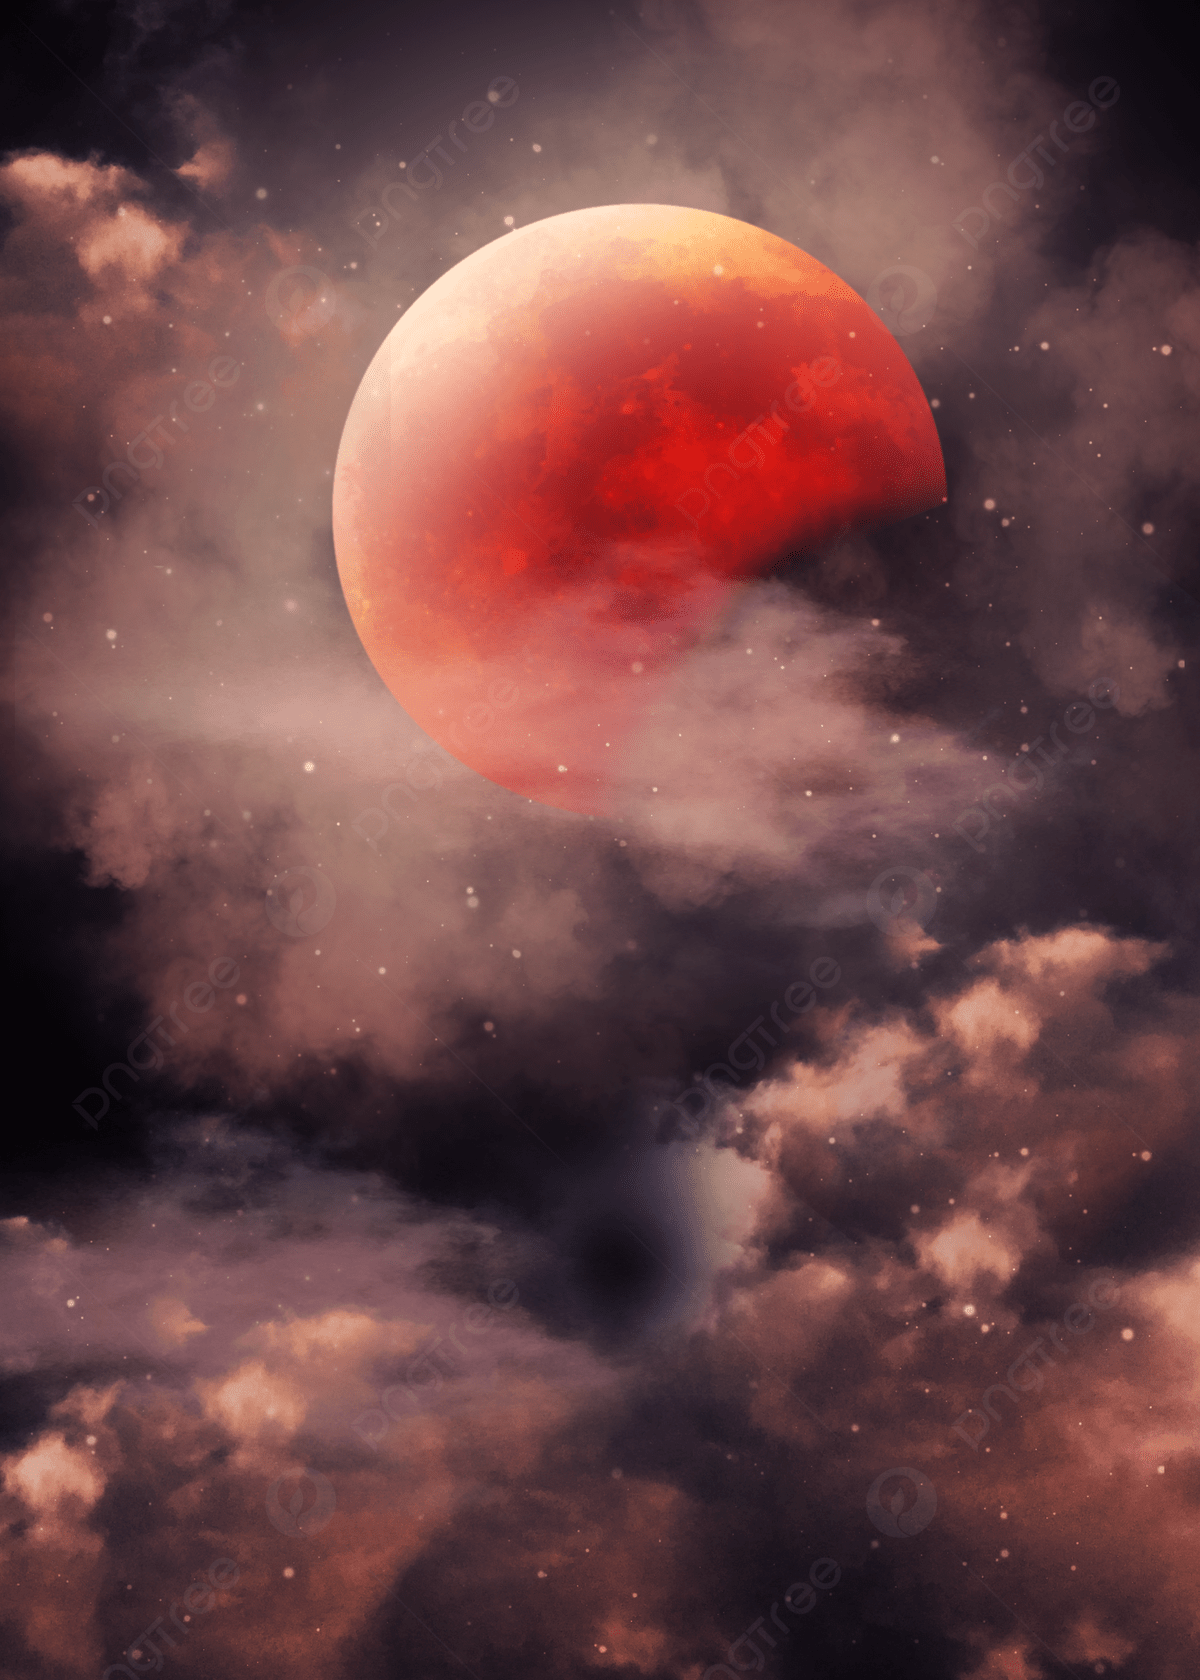 A red planet in a cloudy sky - Eclipse